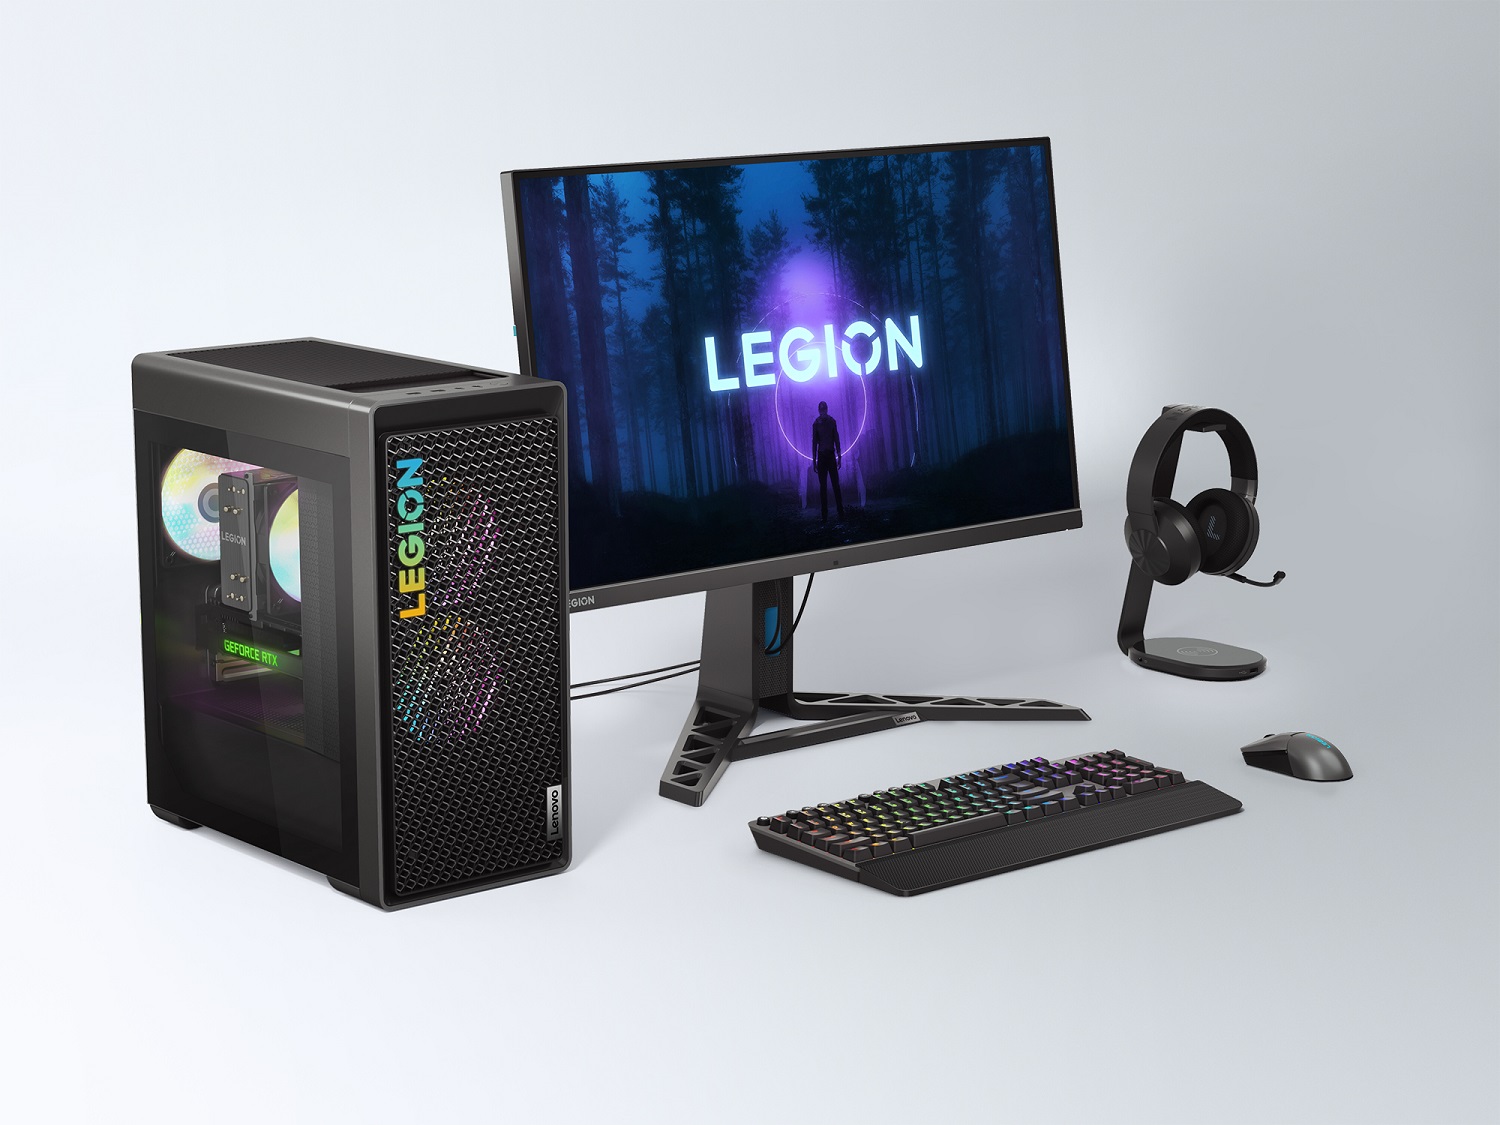 Lenovo's Legion Tower 5i gaming desktop sitting by a monitor and keyboard.